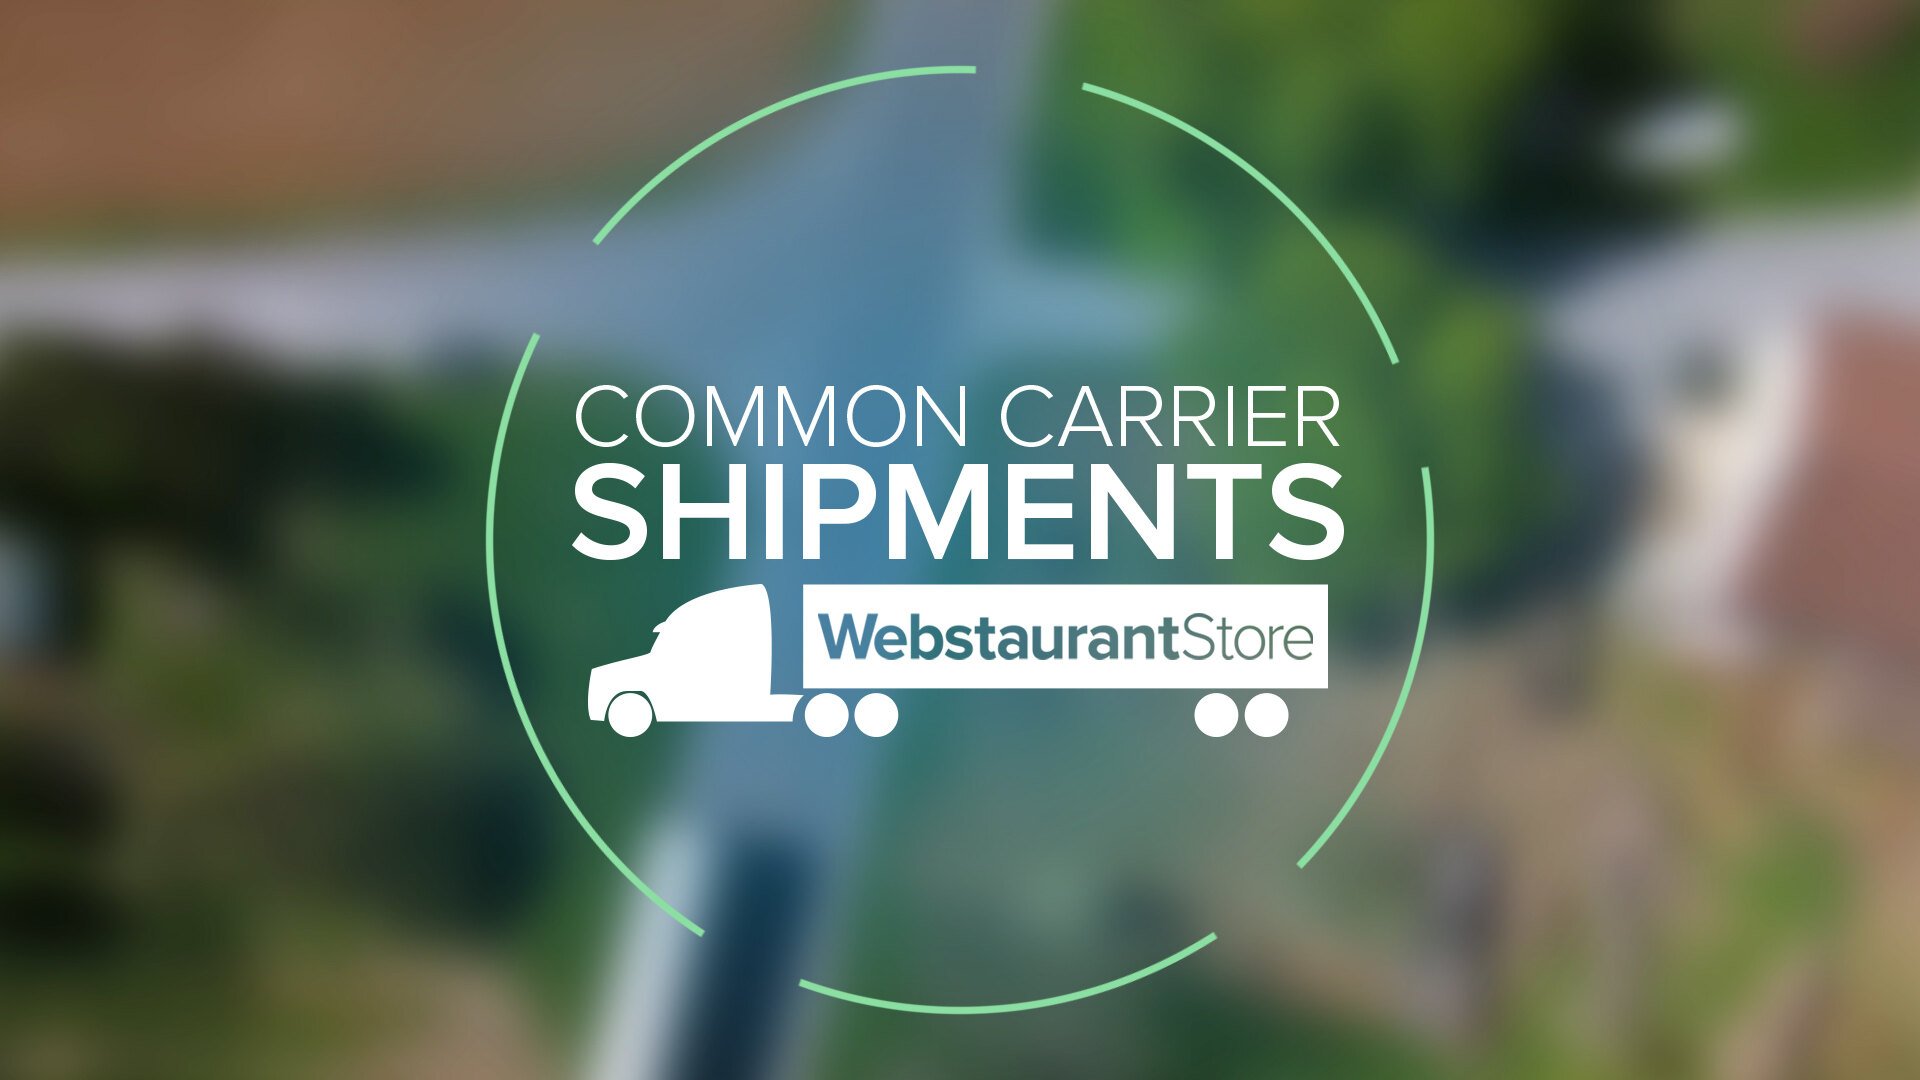 Common Carrier Shipments